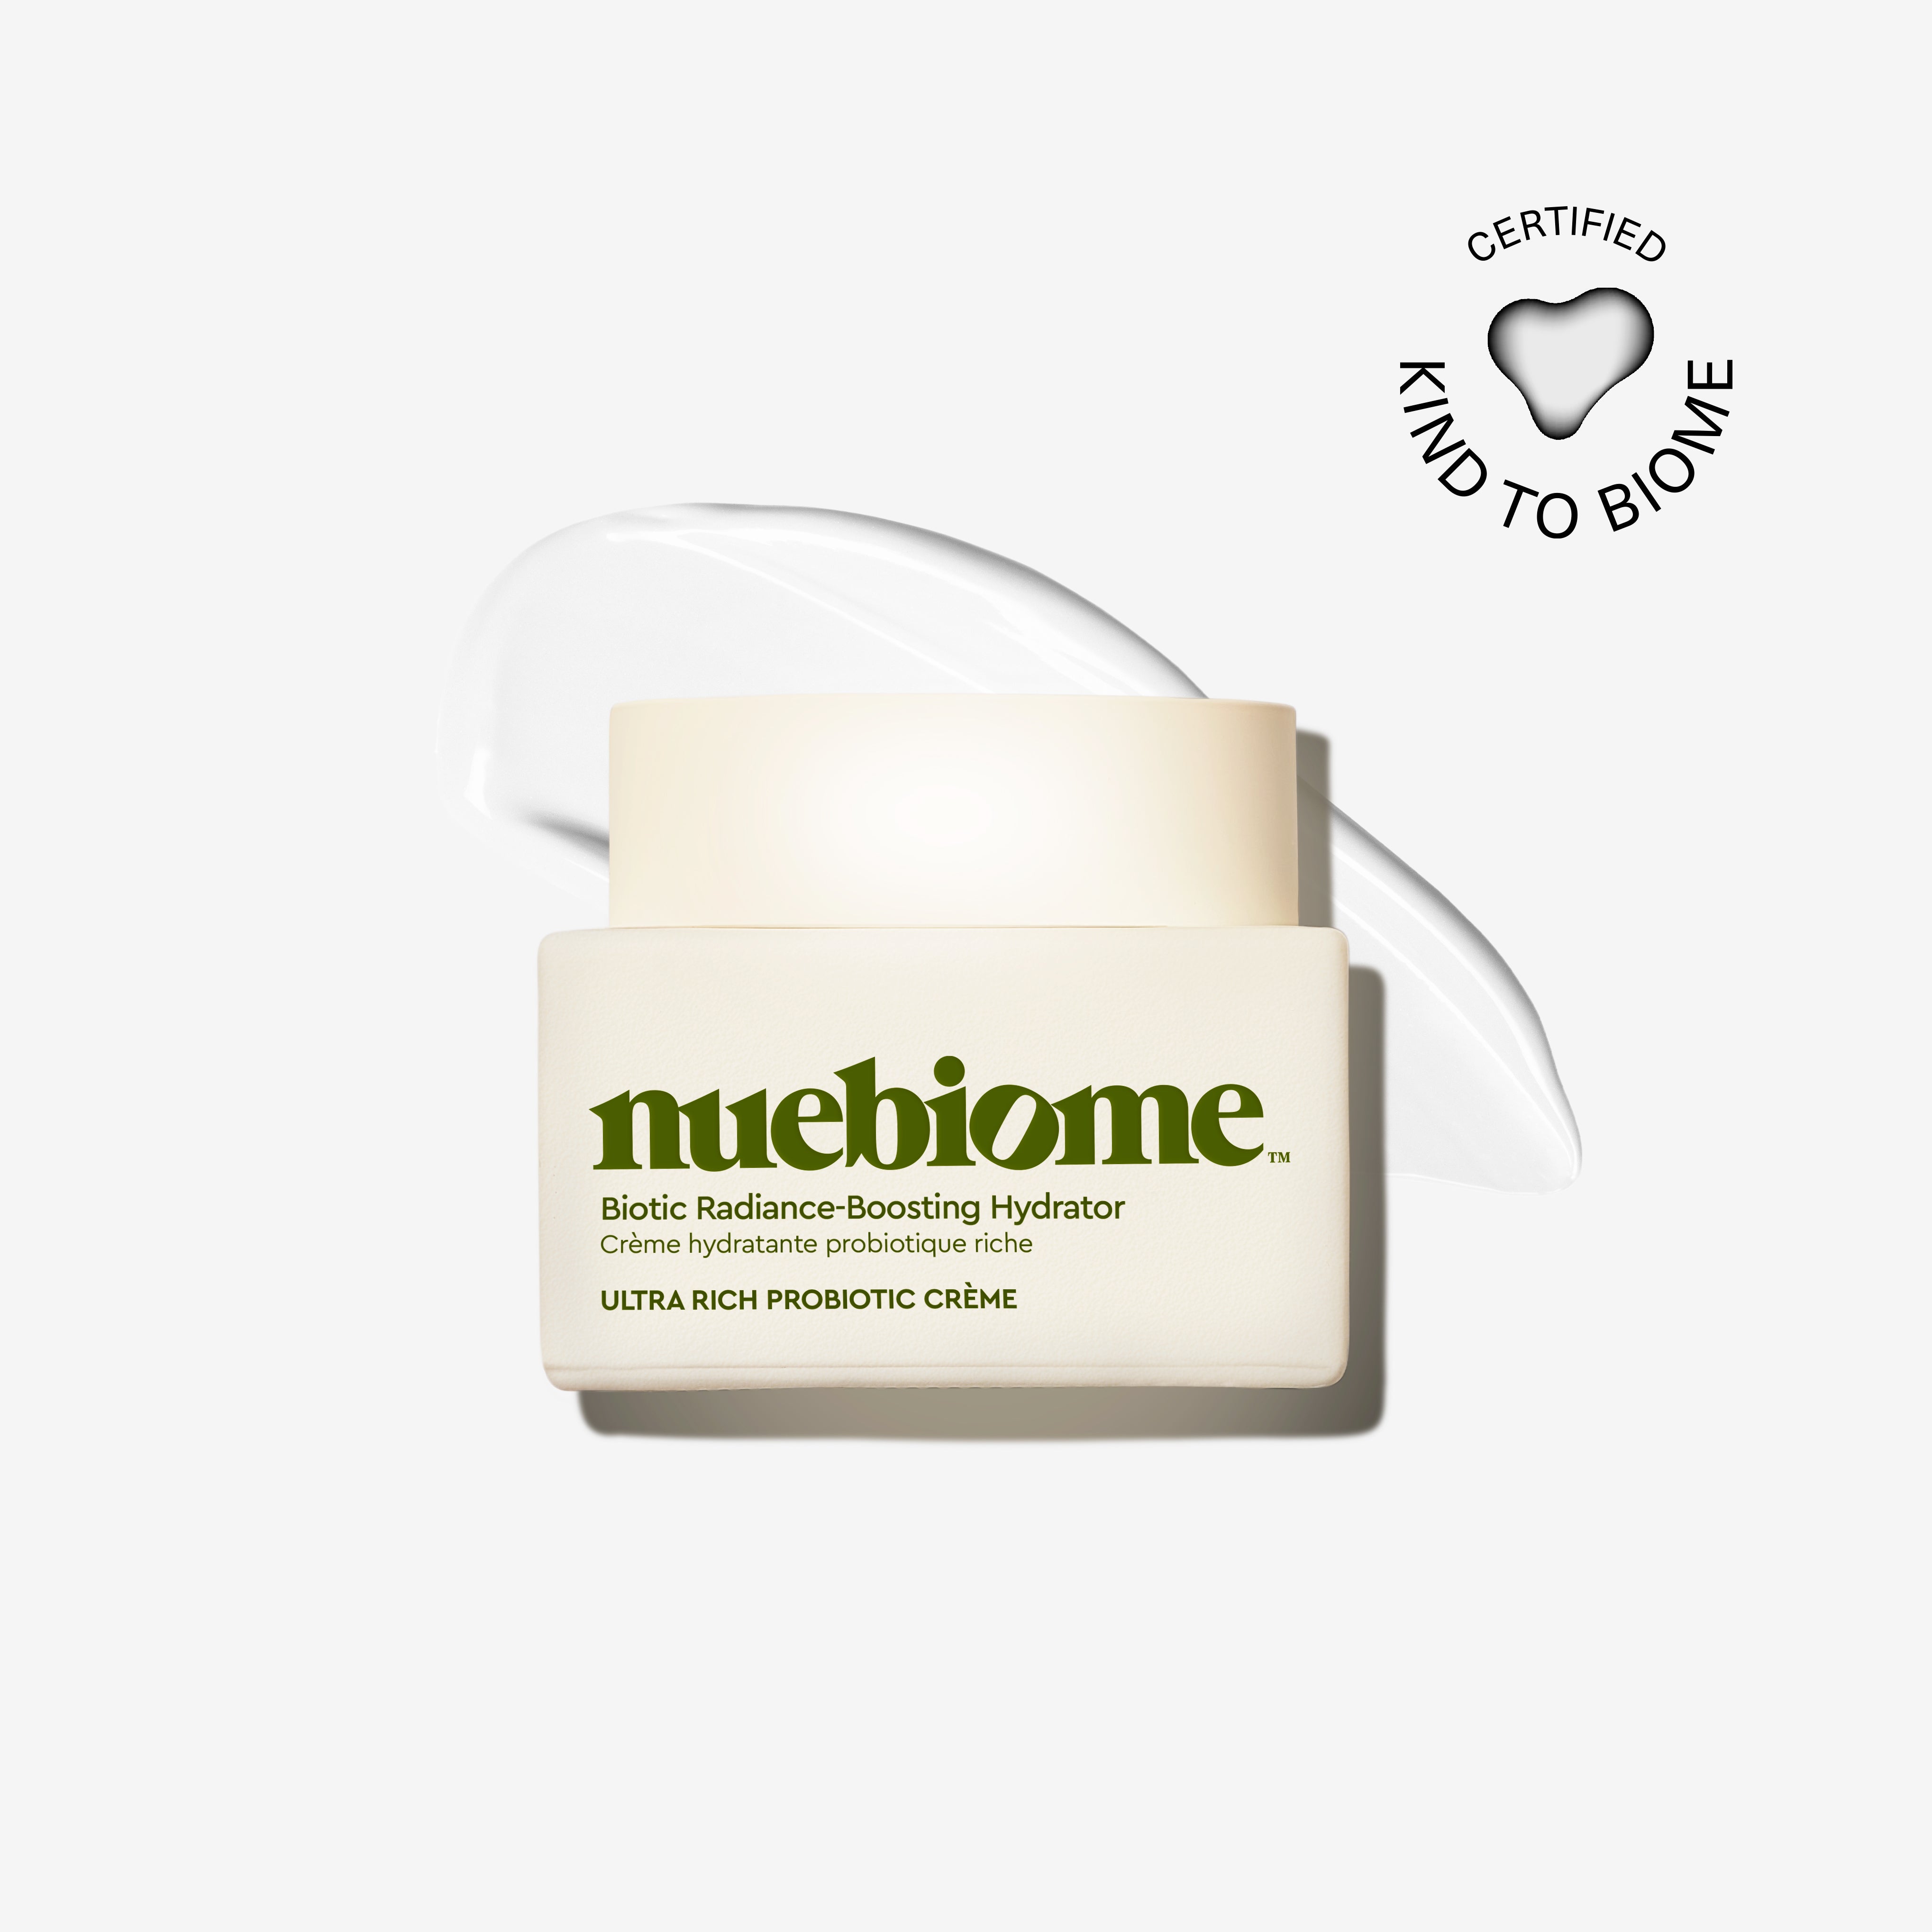 Best moisturizer for dry skin - Shop Nuebiome for youthful skin